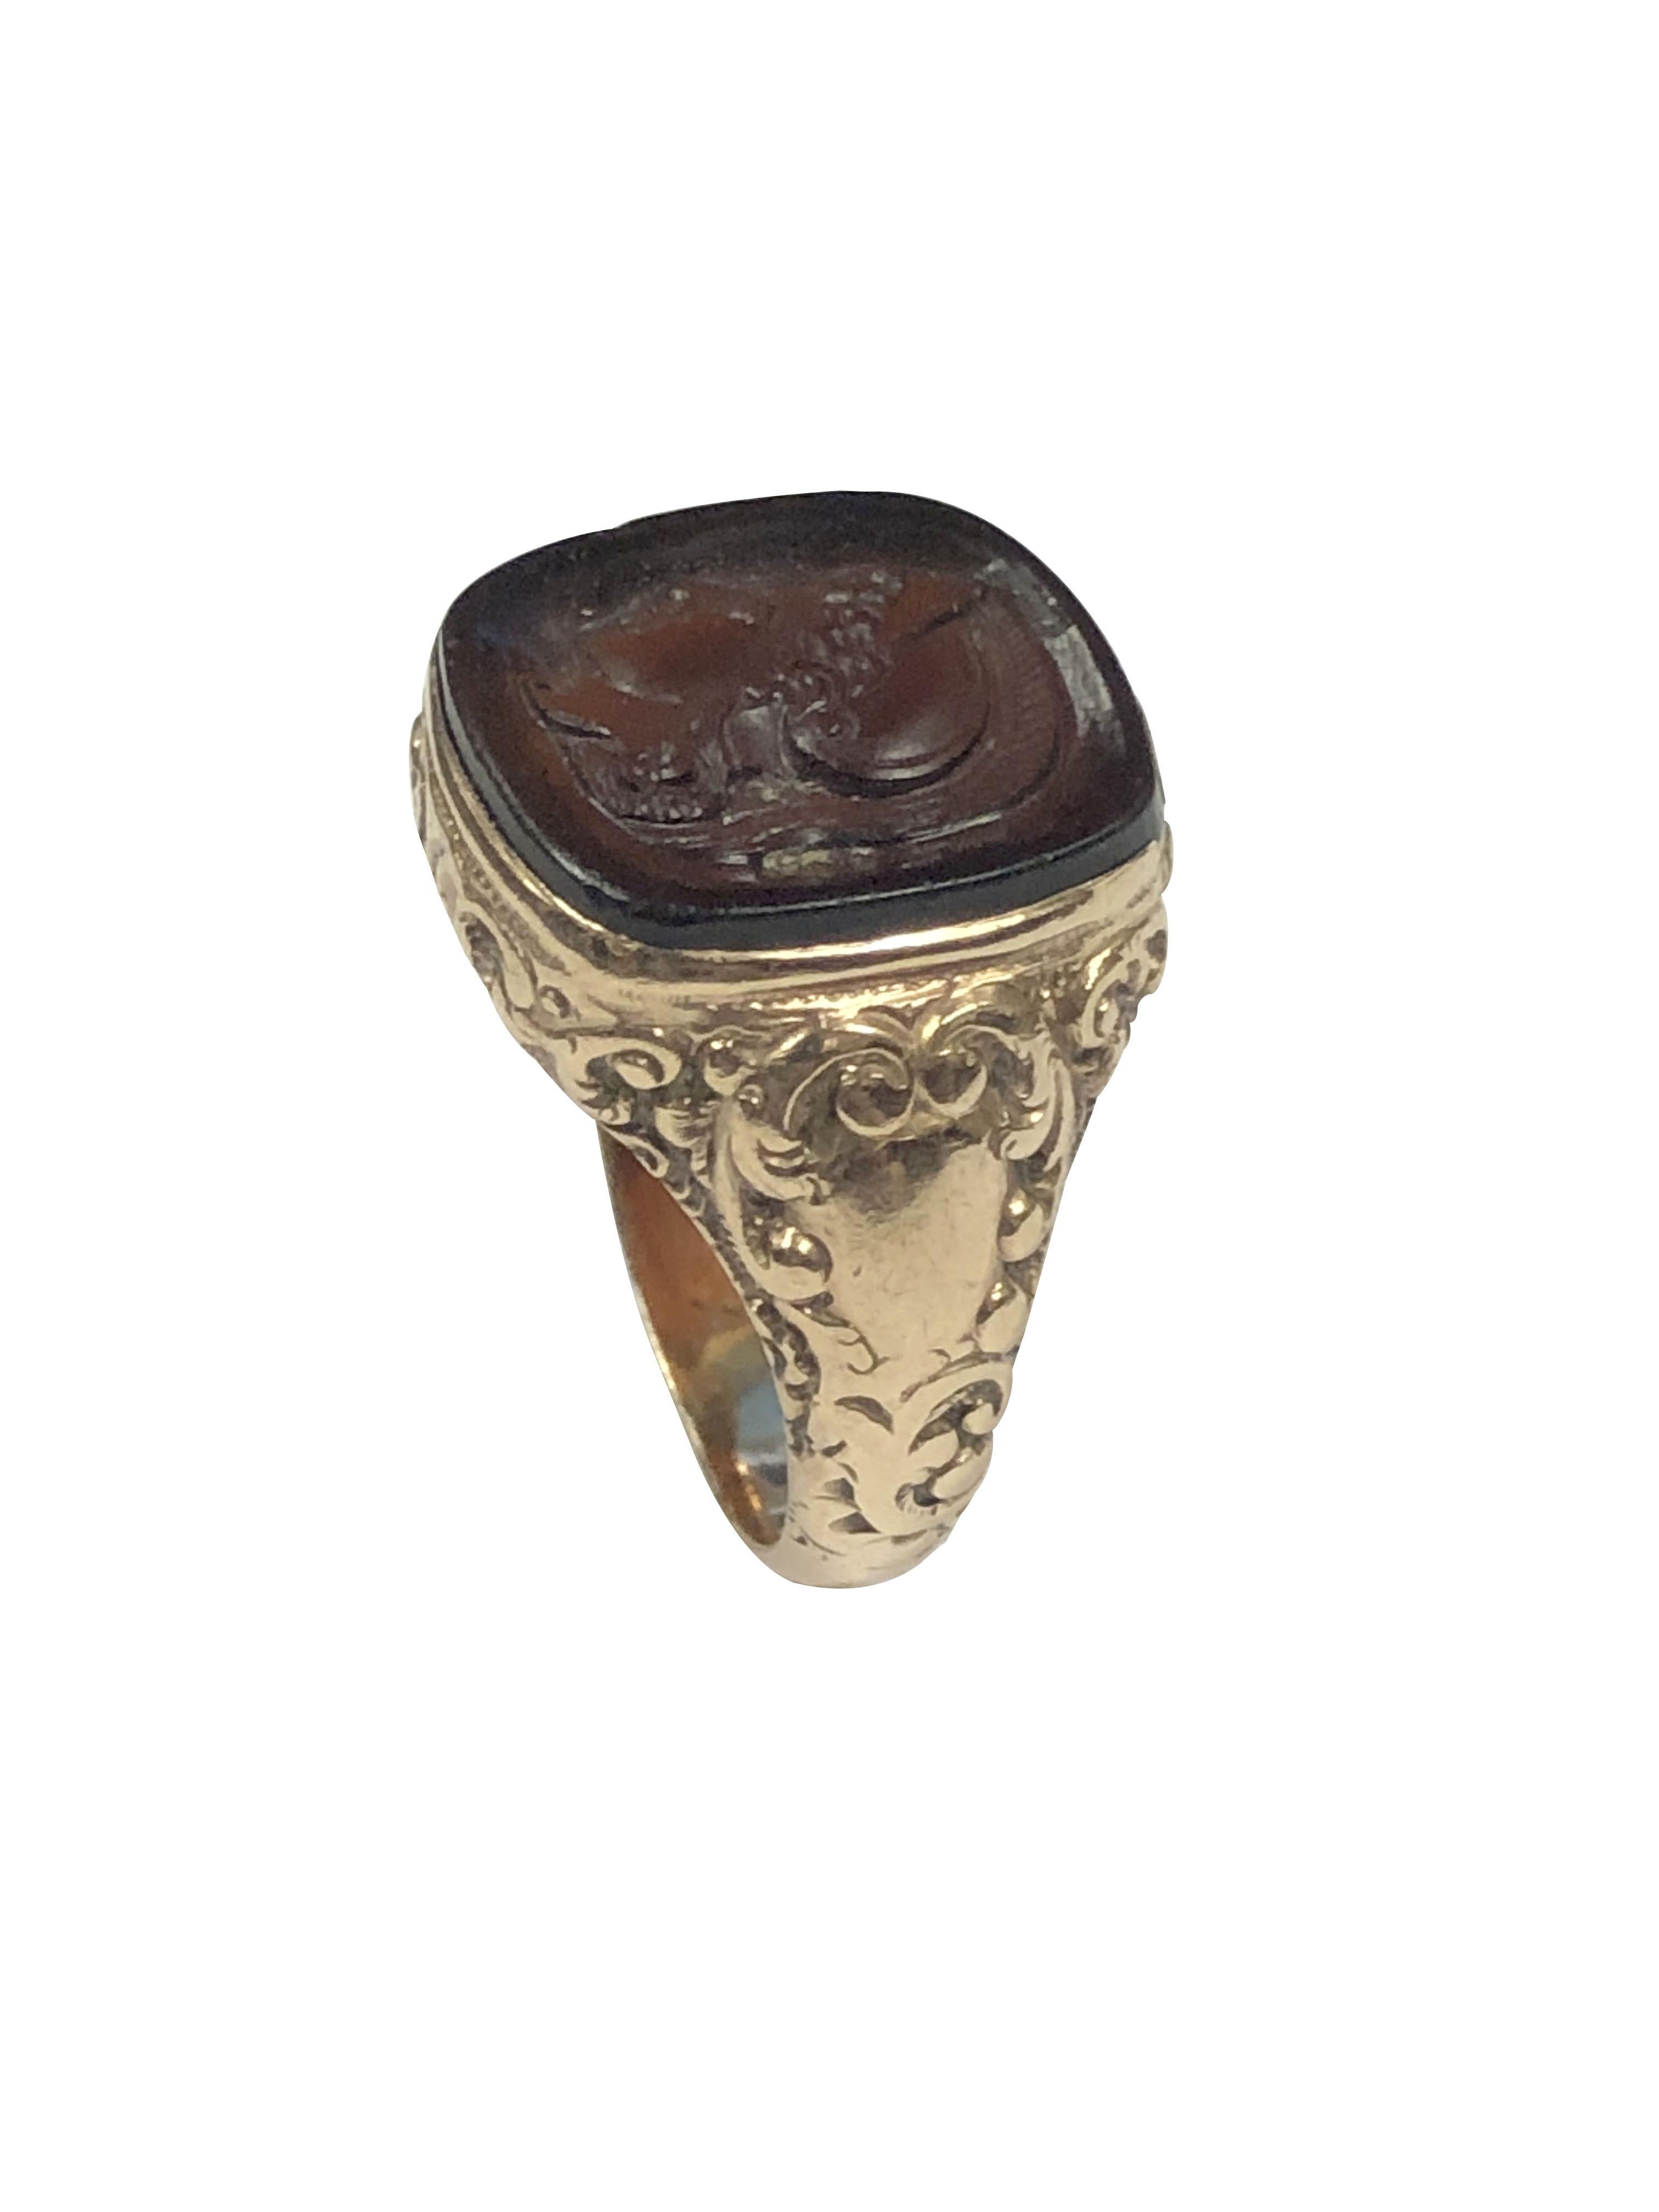 Cabochon Antique Gold and Carnelian Intaglio Signet Ring For Sale